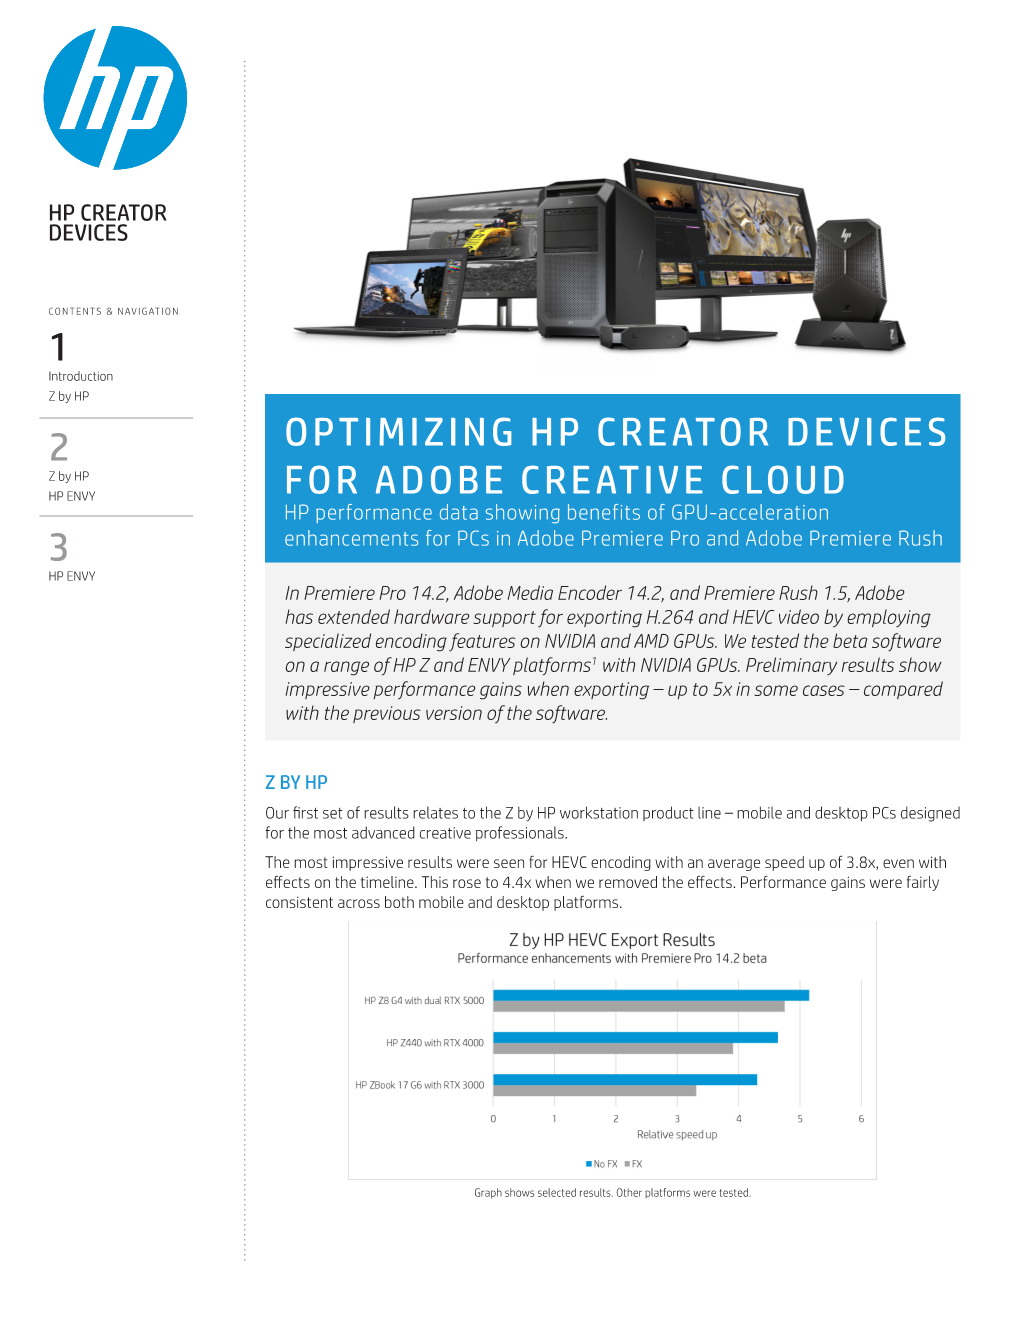 Optimizing HP Creator Devices for Adobe Creative Cloud